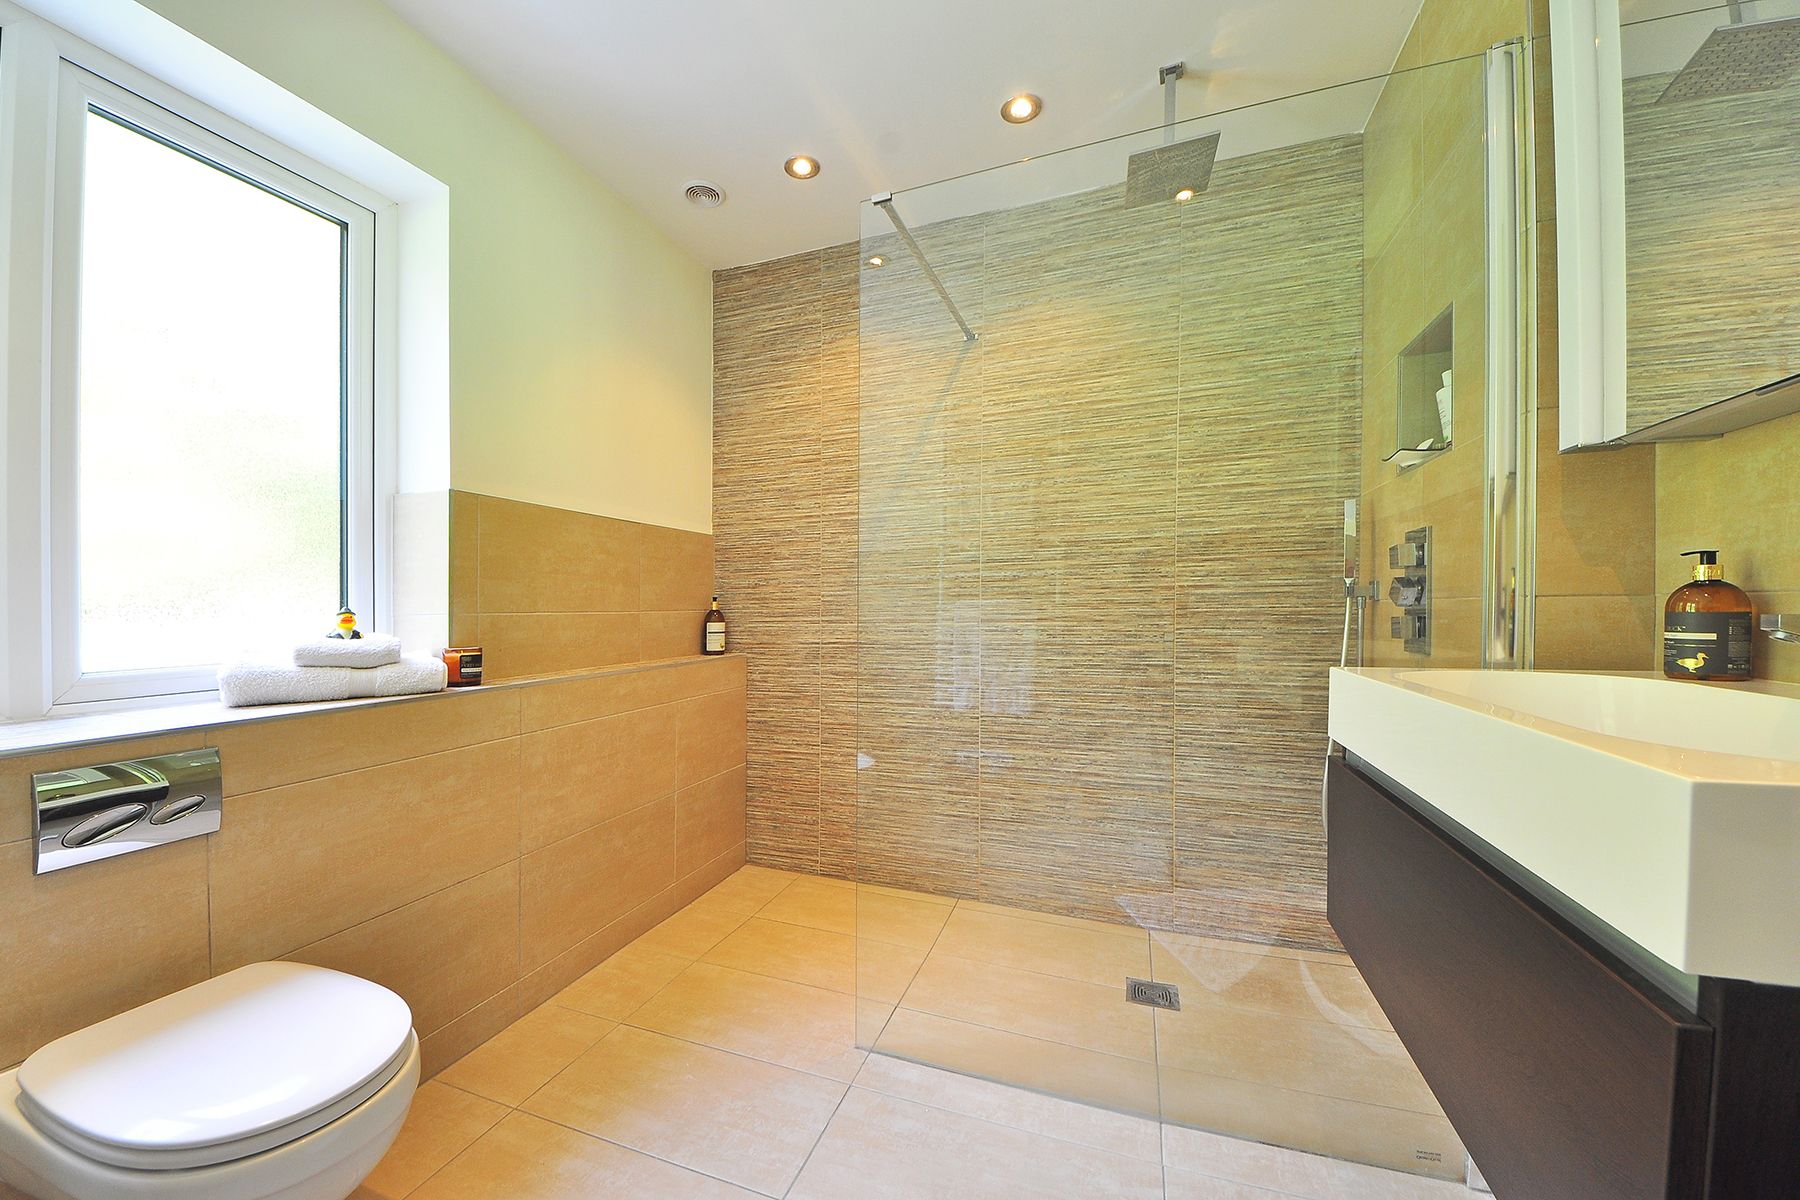 Simple space planning can provide you with great solutions for installing a wet room